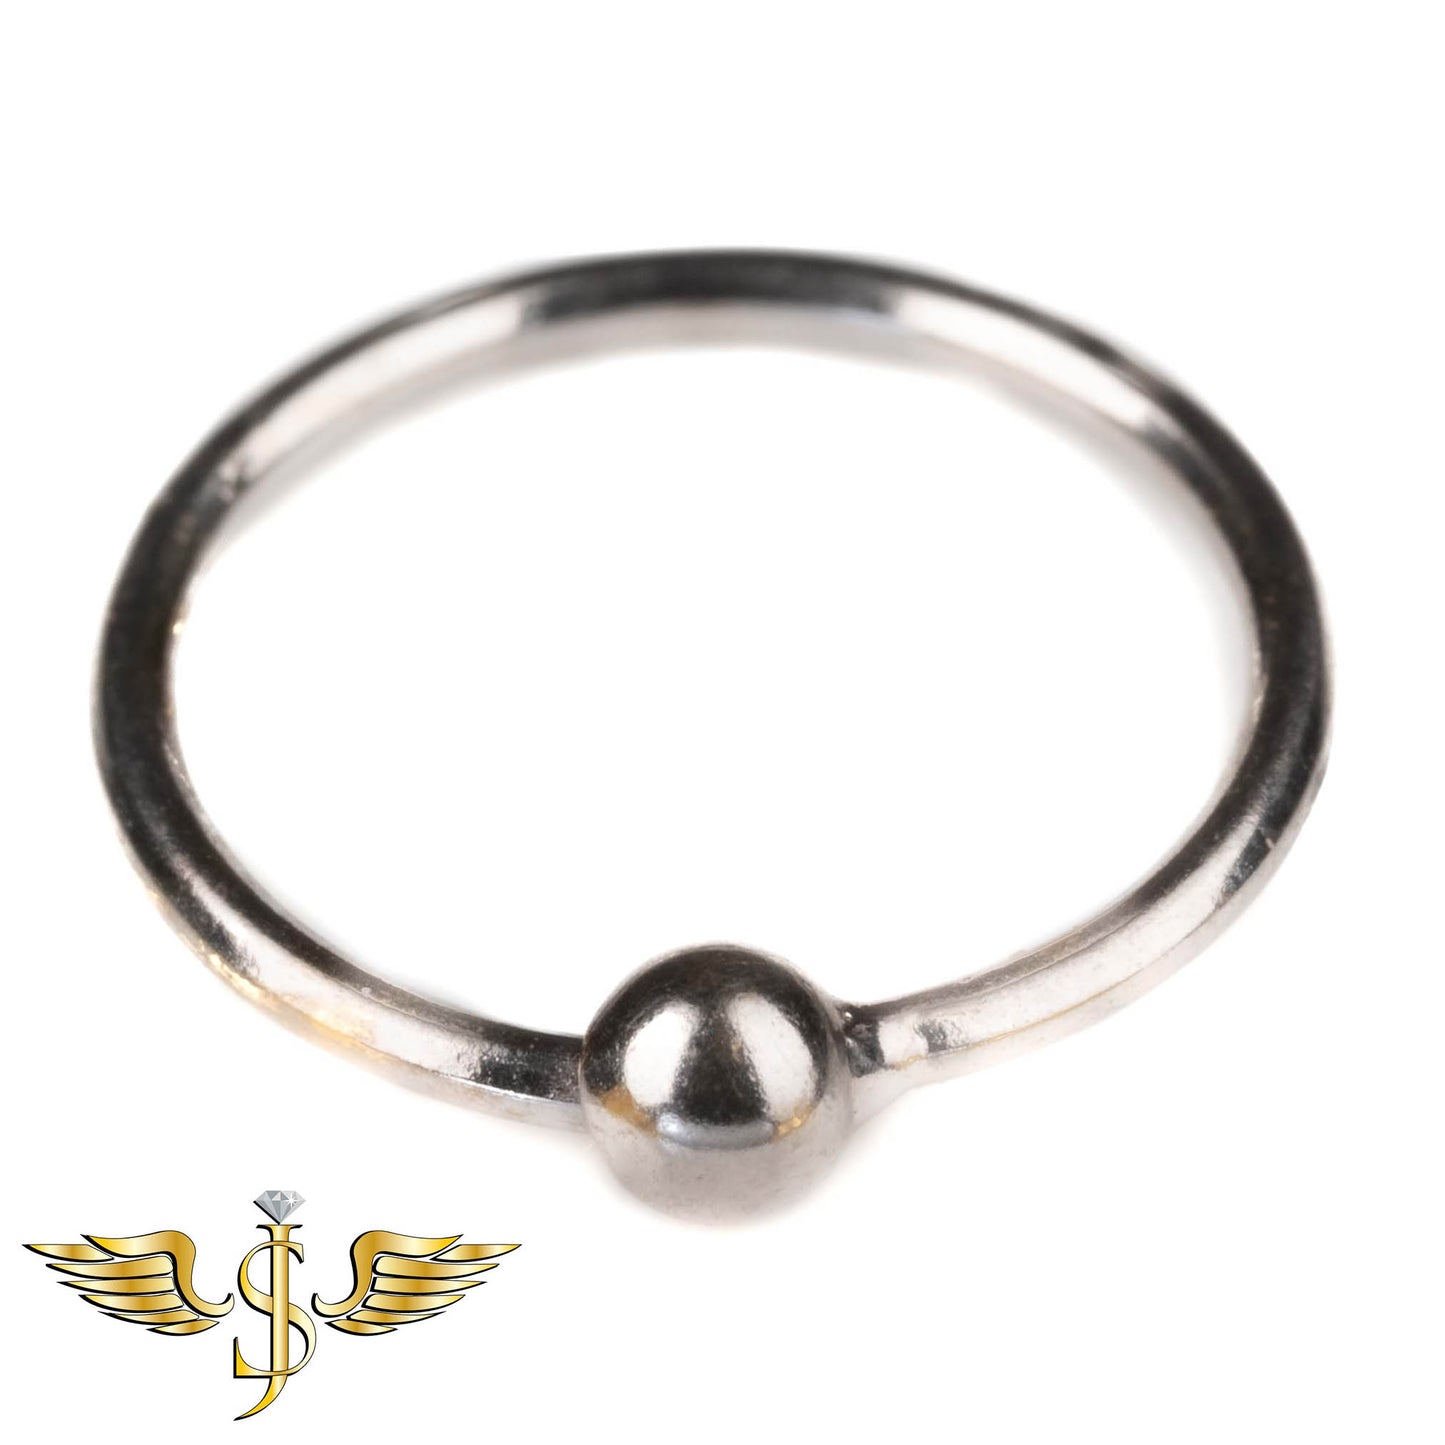 Nose Ring Wire Plain yellow gold 